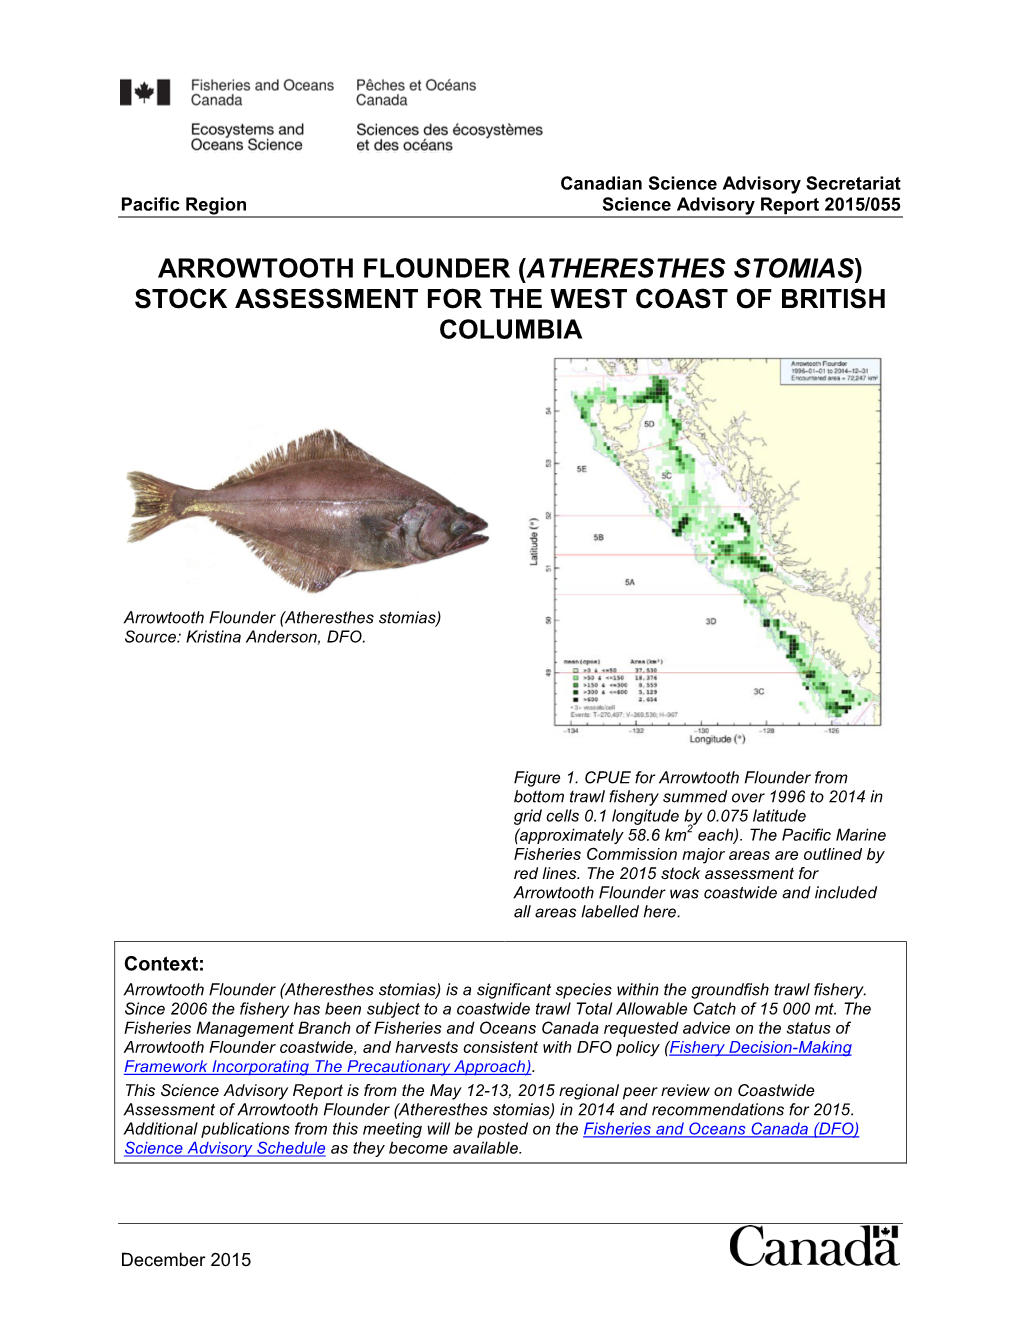 Arrowtooth Flounder (Atheresthes Stomias) Stock Assessment for the West Coast of British Columbia